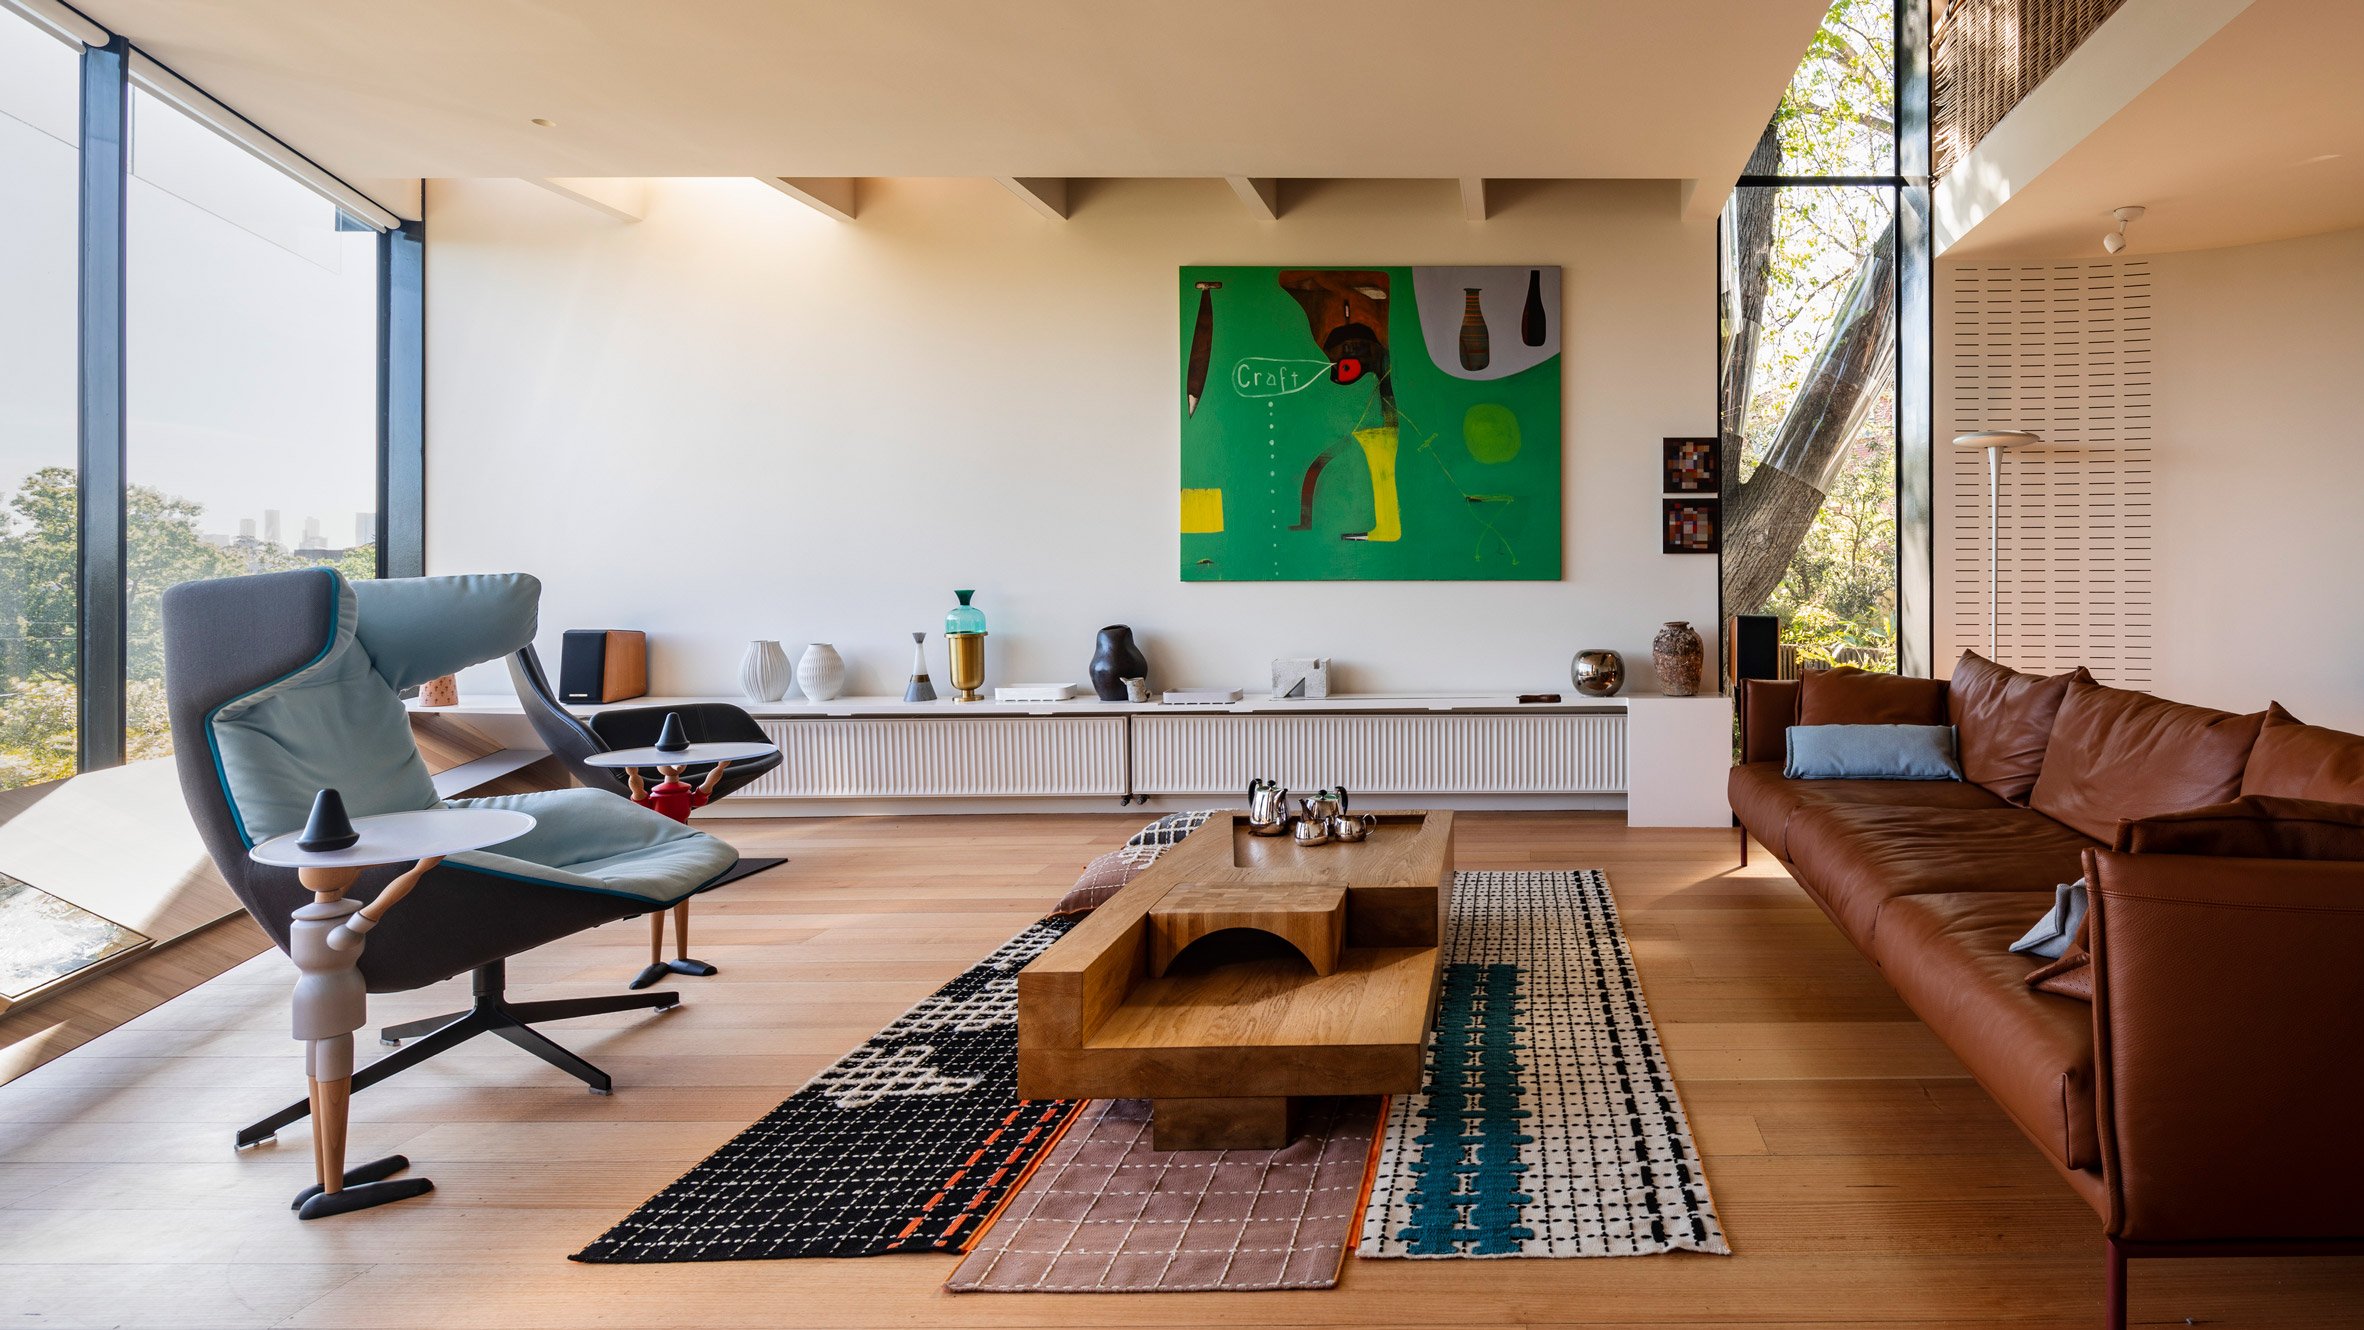 Ten homes with interiors designed to showcase art